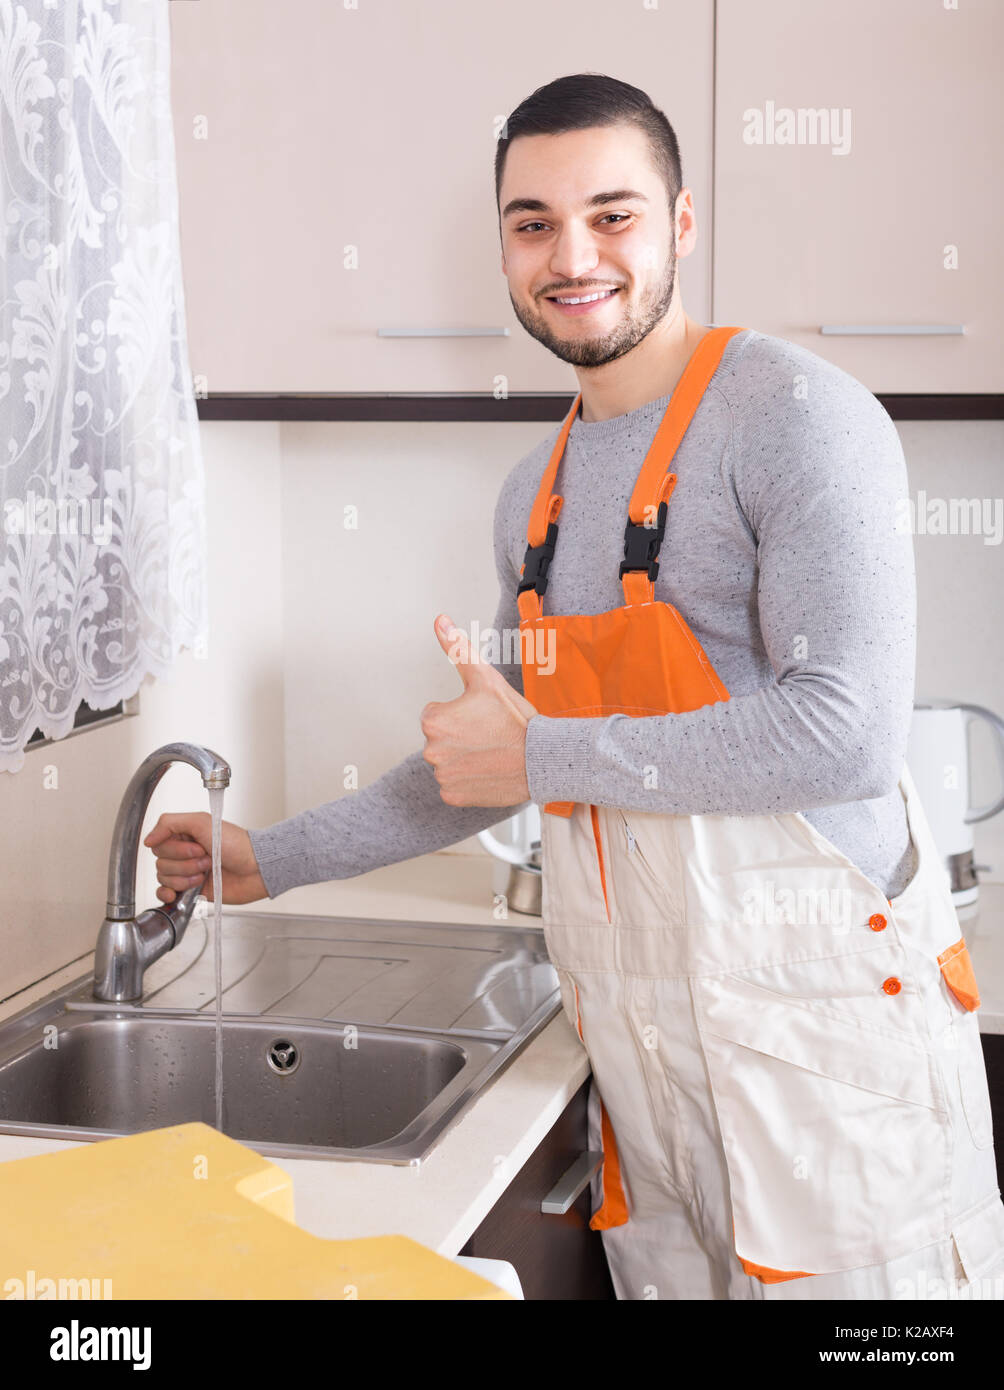 Smiling plumber in uniform successfully working at home of client Stock Photo